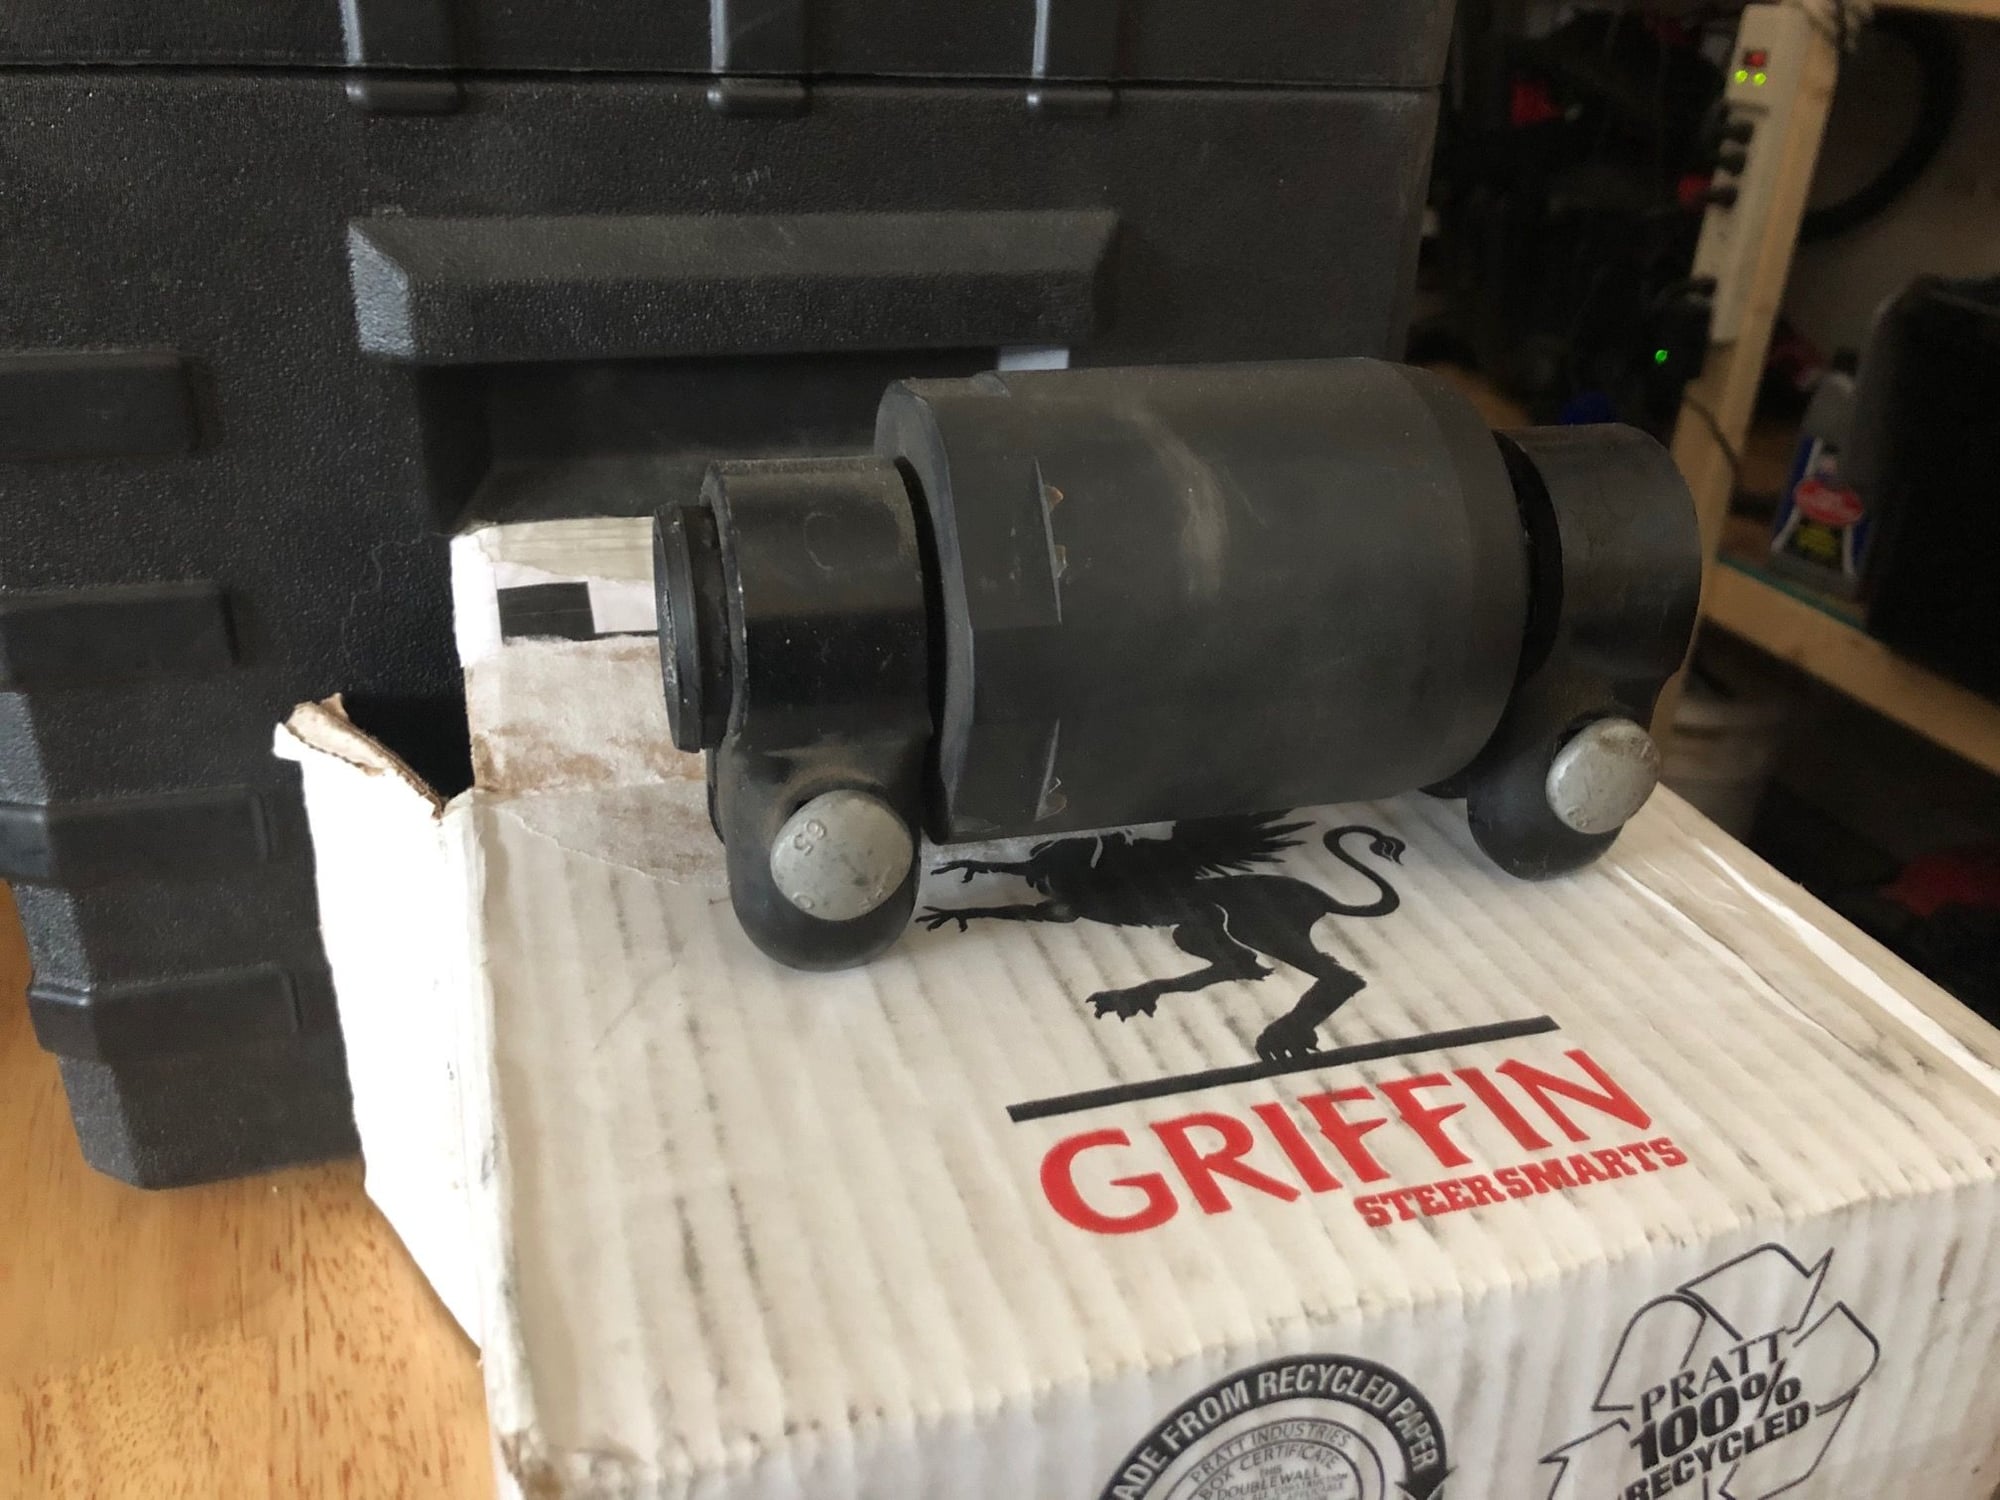 Steering/Suspension - JK/JKU Griffin Steering Attenuator - Used - 2007 to 2017 Jeep Wrangler - Colorado Springs, CO 80920, United States